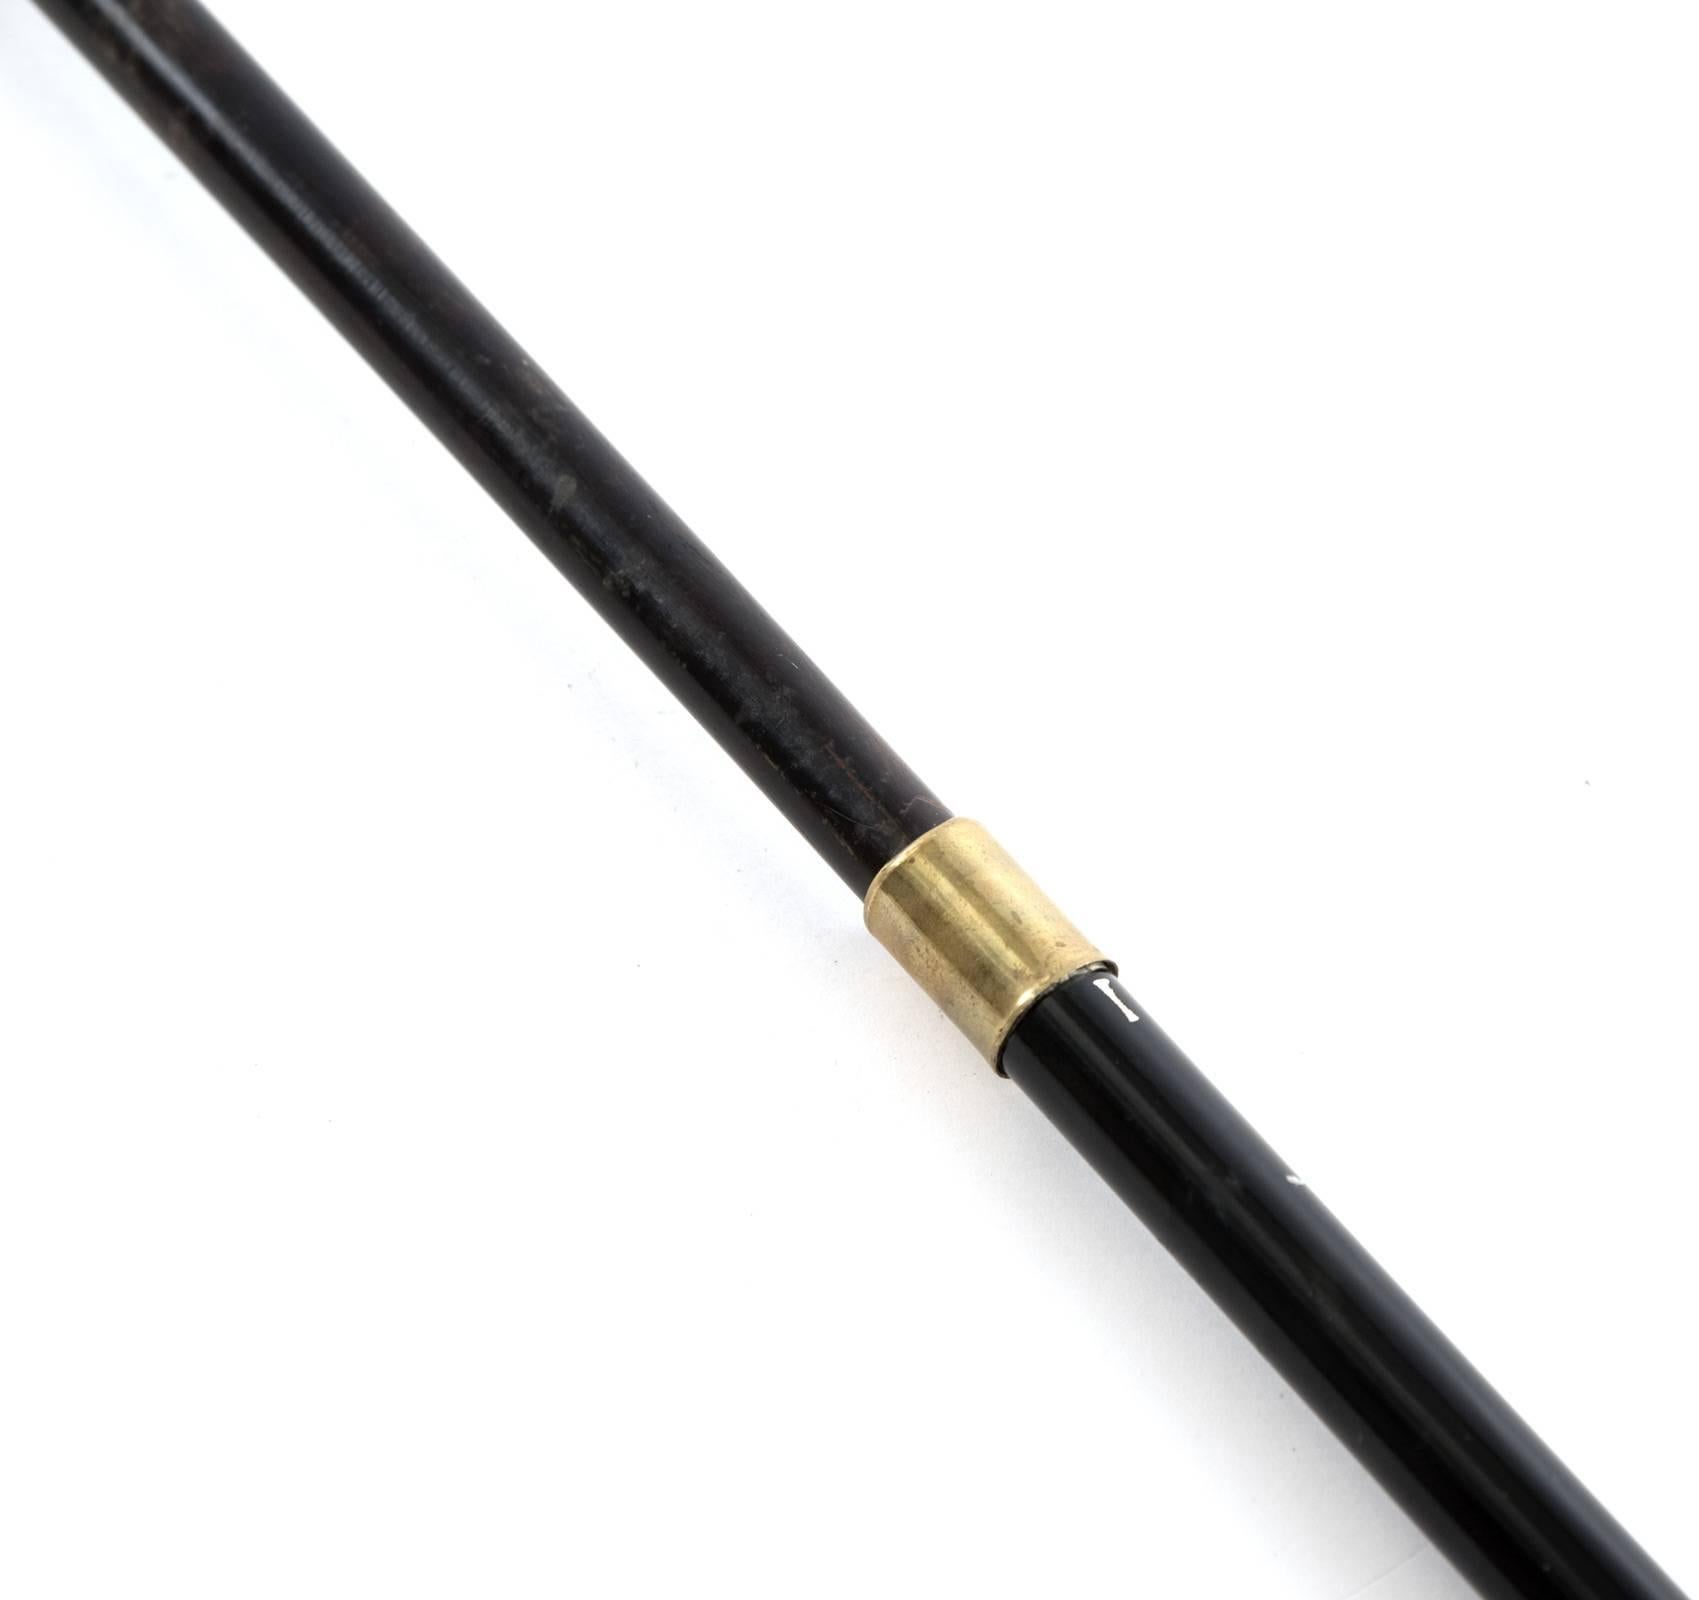 A turn of the century cane topped with an antler handle and sterling silver collar with raised engraving, and an ebonized, re-sizable sheath with a brass neck. Missing ferrule.